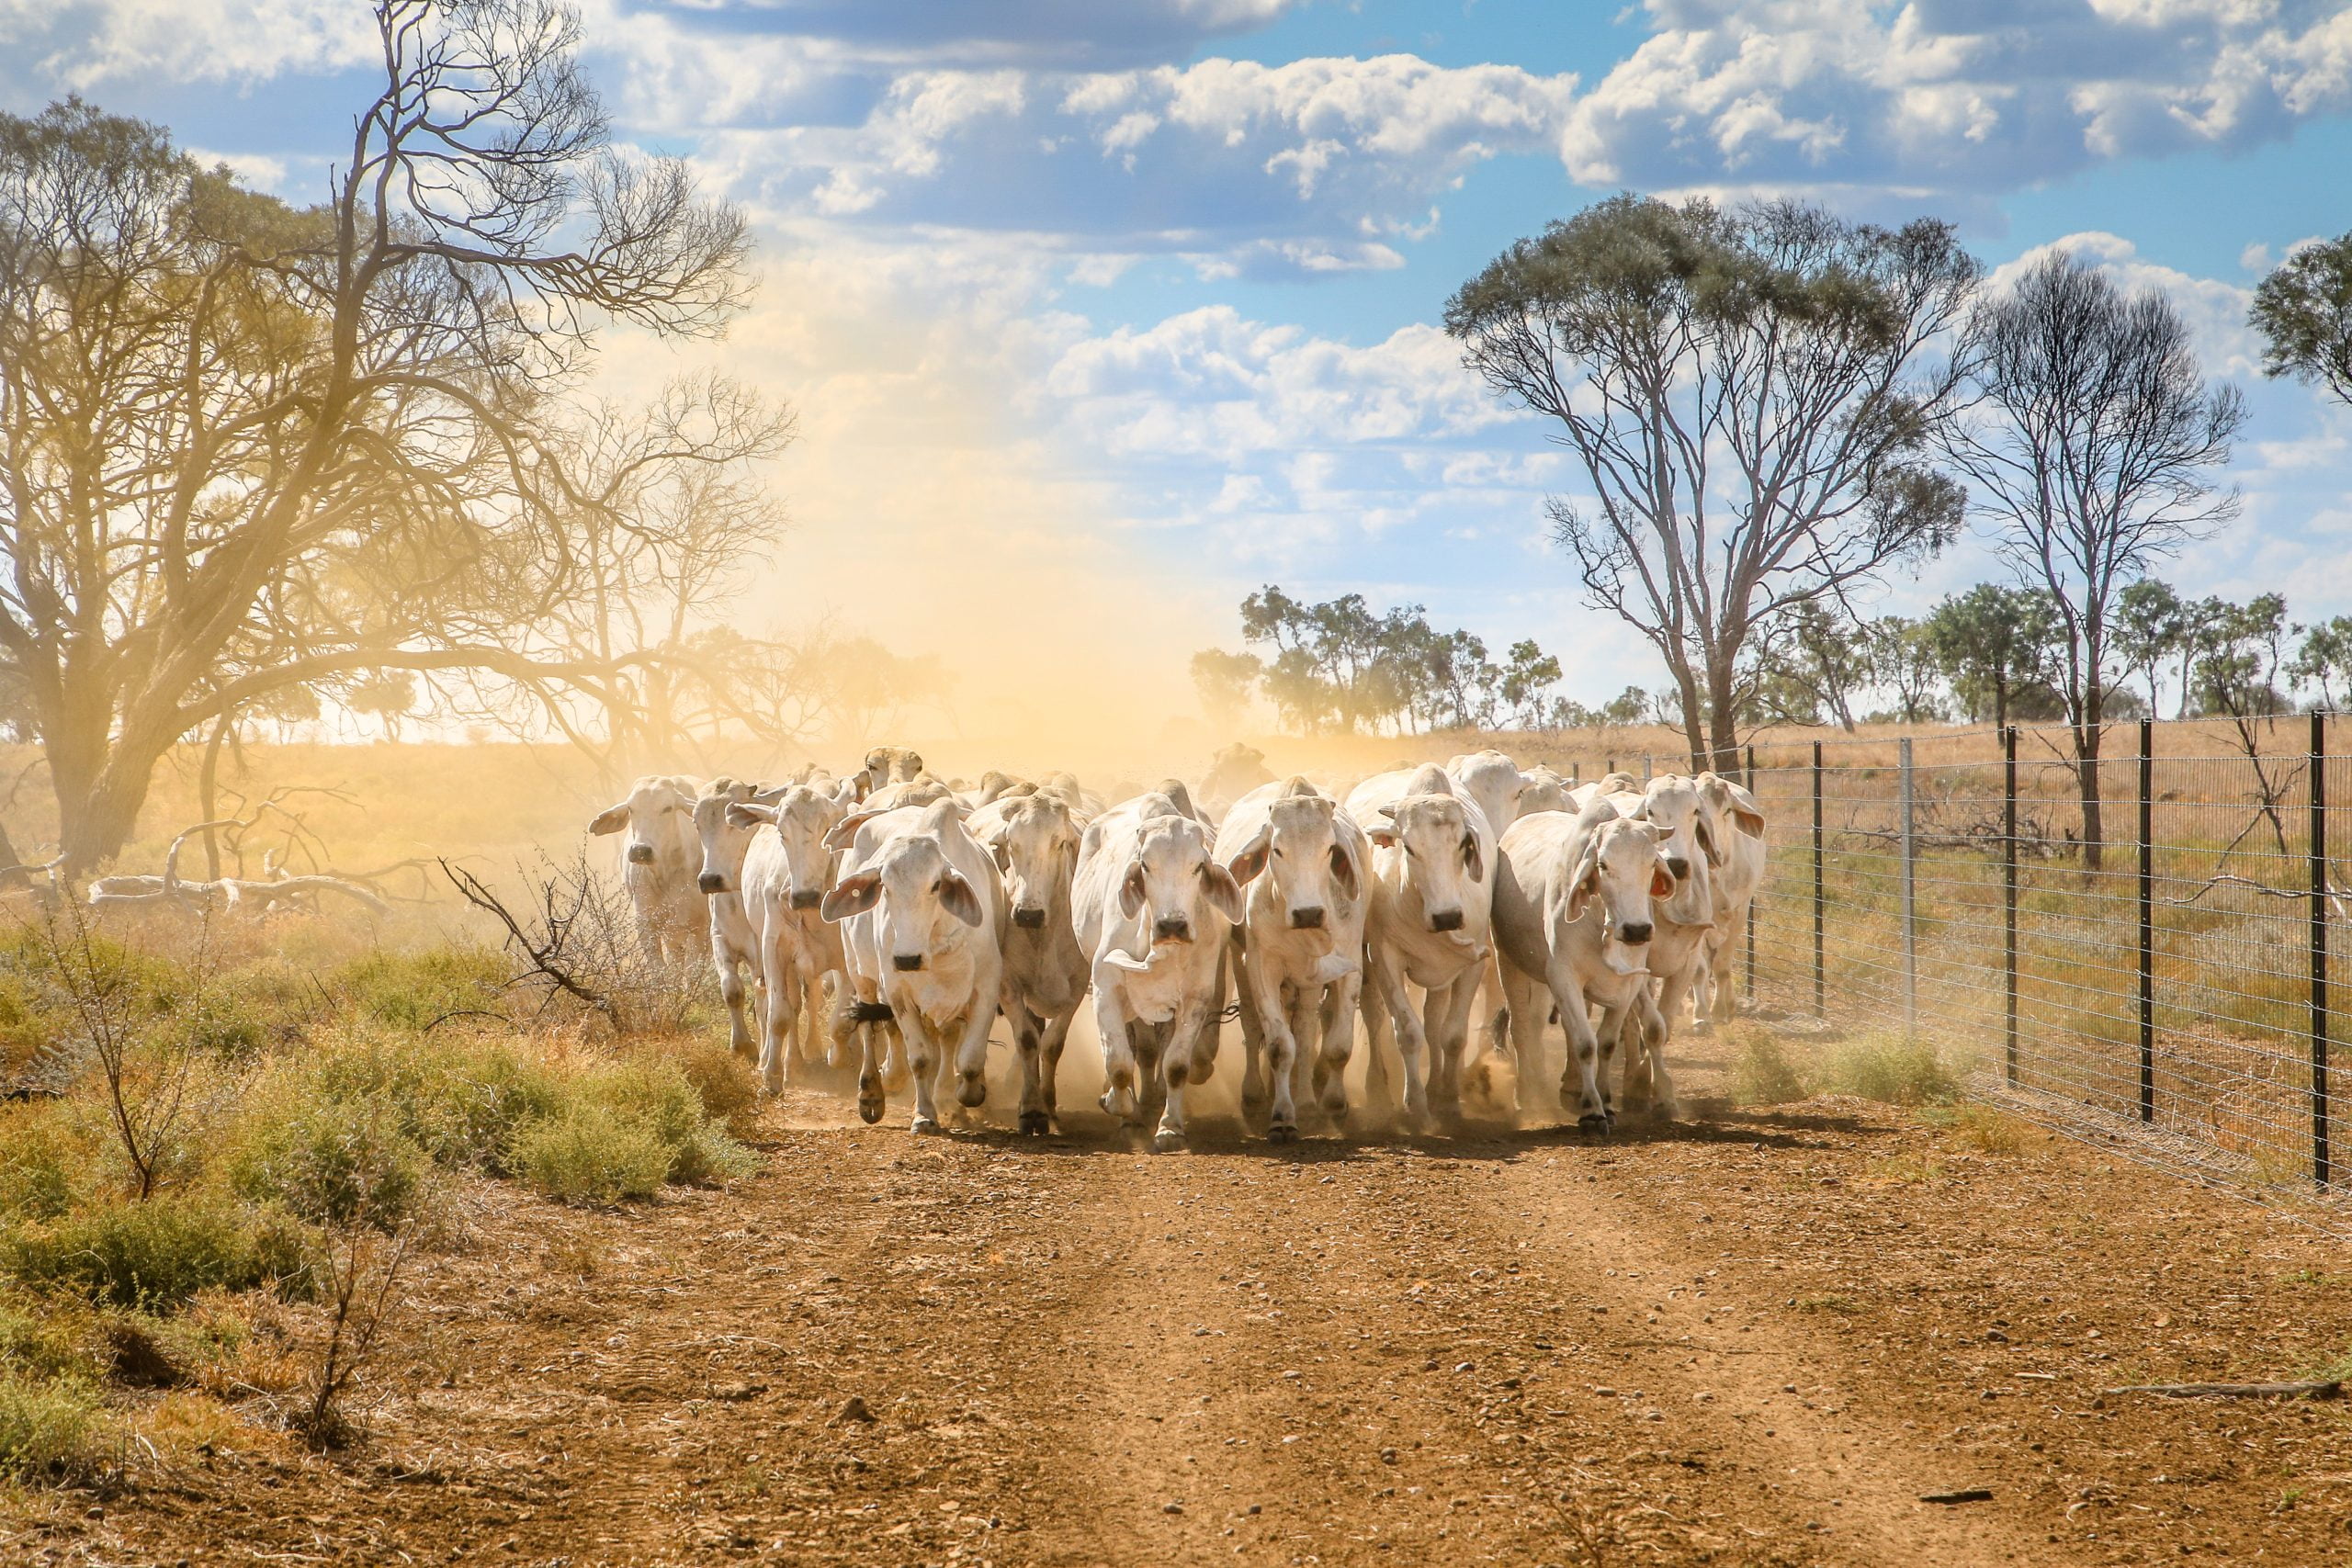 Brahman,Cattle,Coming,Up,A,Dusty,Road,Landscape,In,Outback